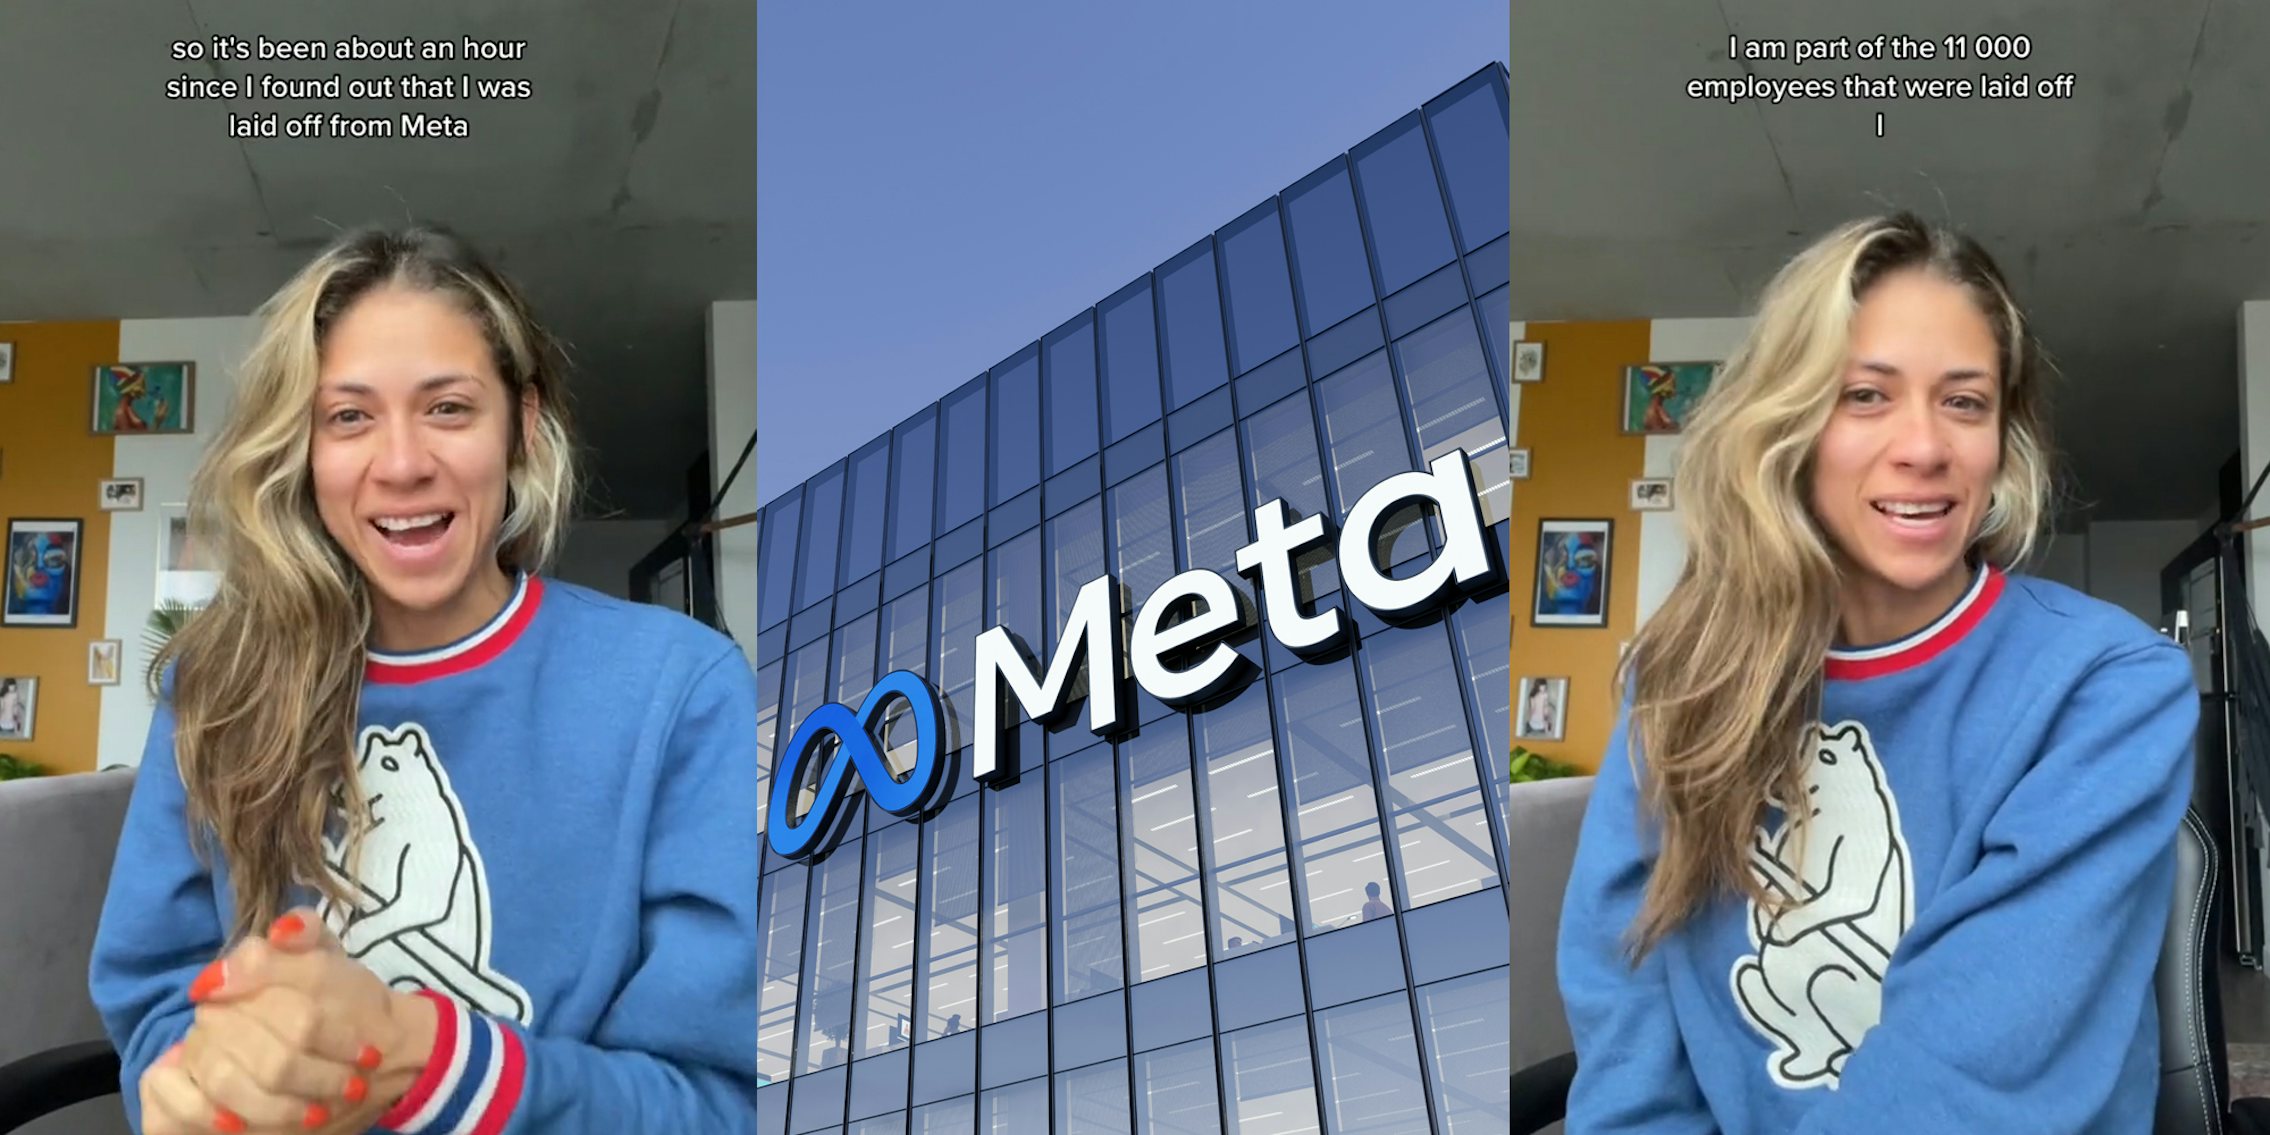 Ex Meta employee speaking caption 'so it's been about an hour since I found out that I was laid off from Meta' (l) Meta logo on corporate building (c) Ex Meta employee speaking caption 'I am part of the 11 000 employees that were laid off' (r)